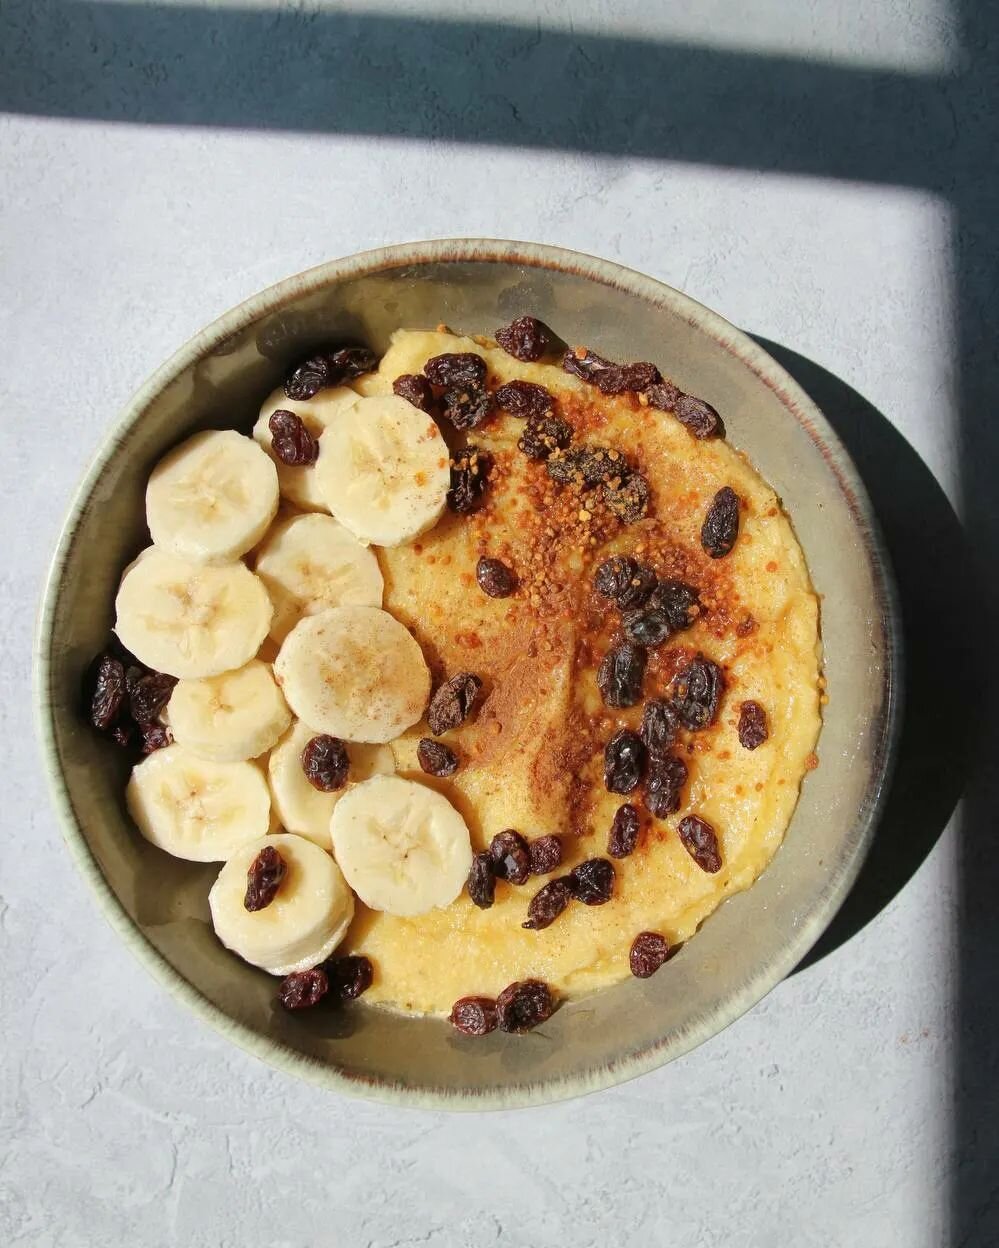 Photos taken seconds before disaster (me desperately trying to convince Alba we have a winning shot so I can mix this bowl up and start inhaling it). Masa Harina, salt, collagen, cinnamon, bee pollen, raw honey, raisins, and bananas. The only thing t